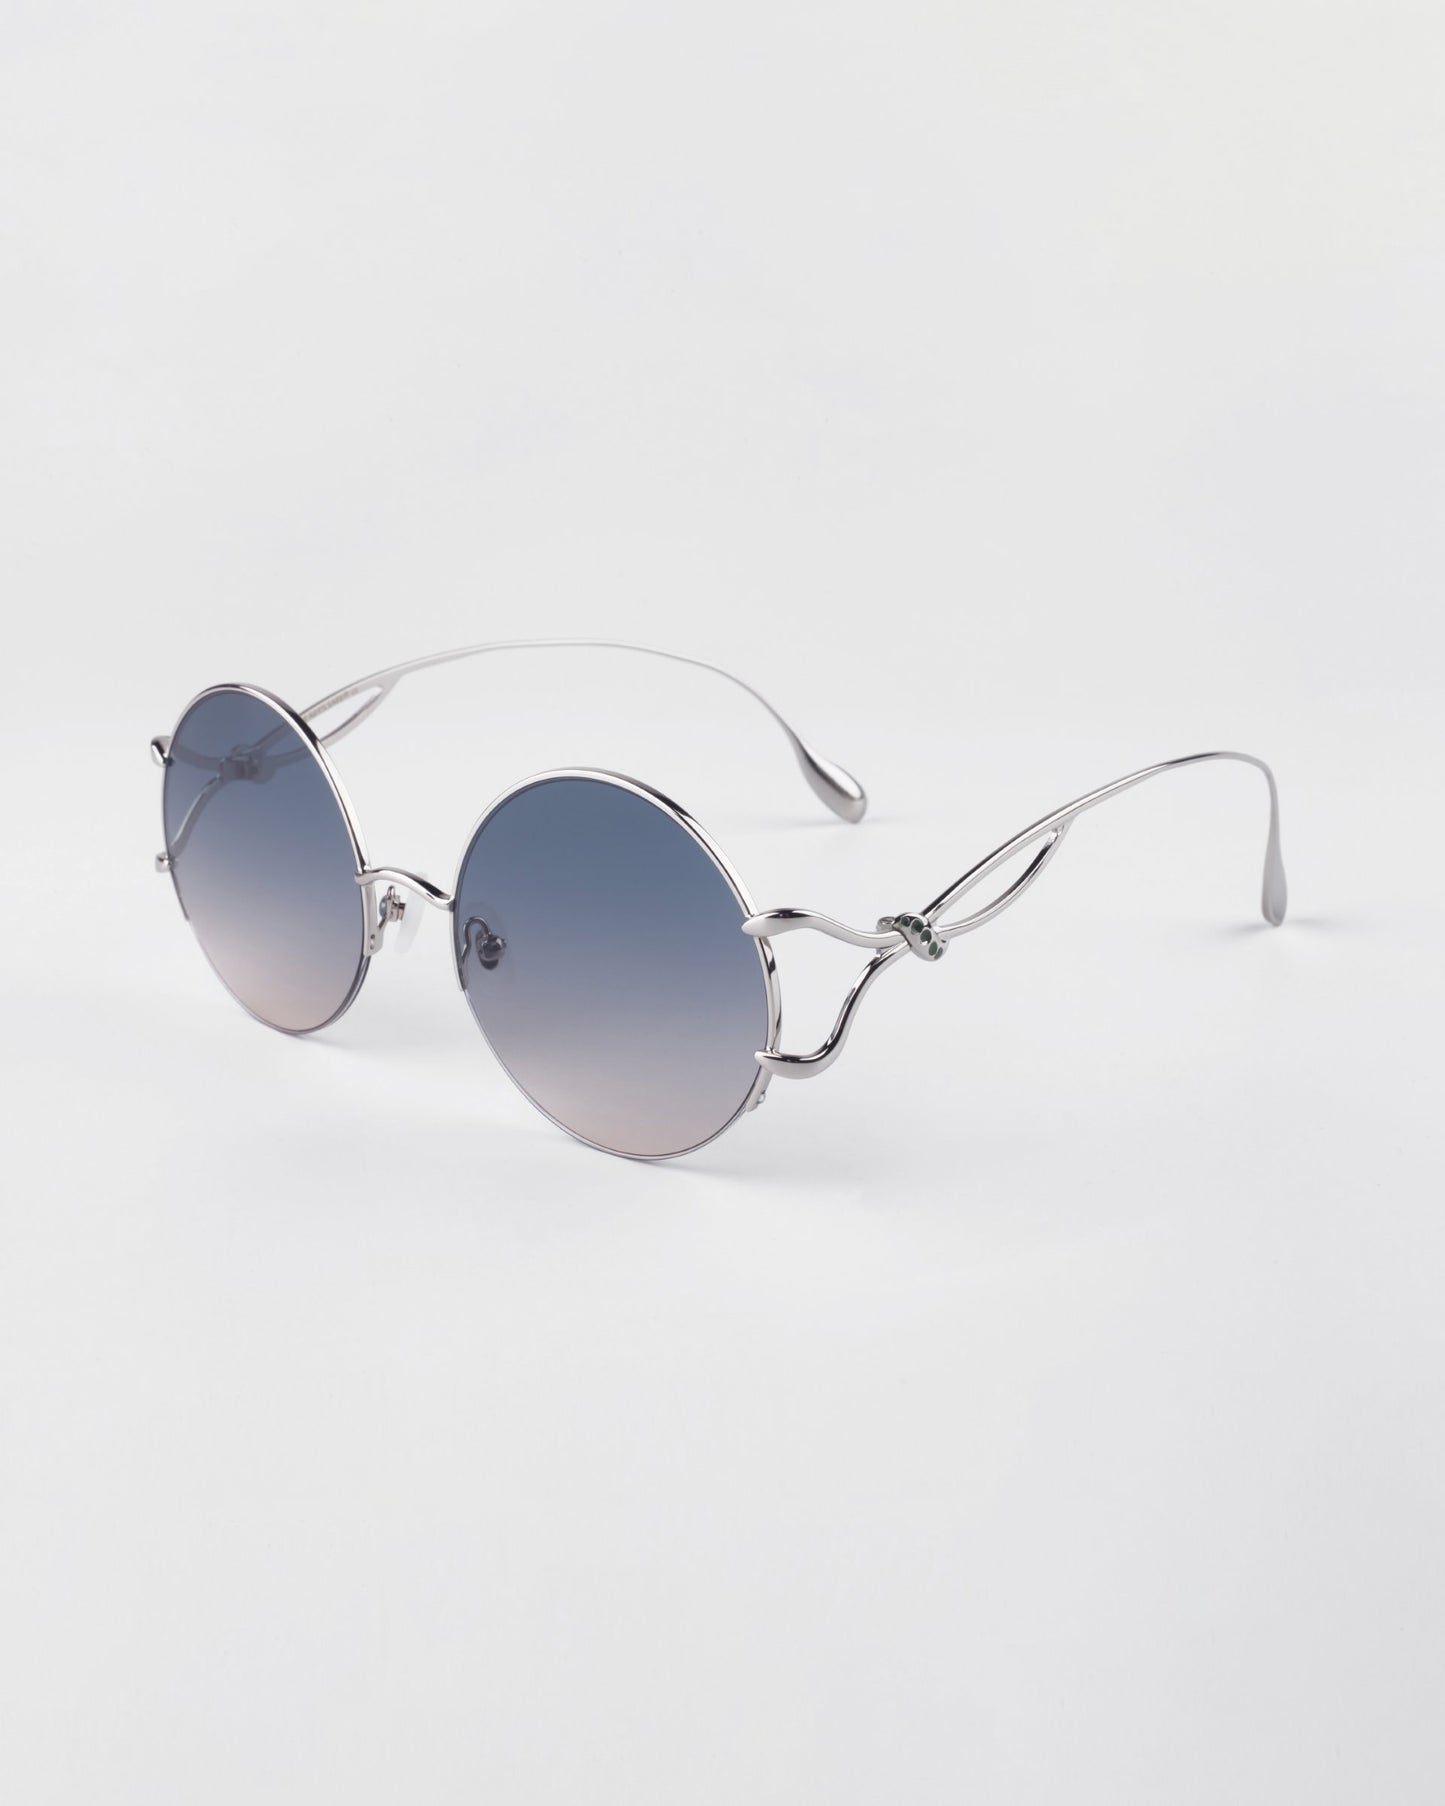 Diptych Sunglasses in Topaz. Side View.